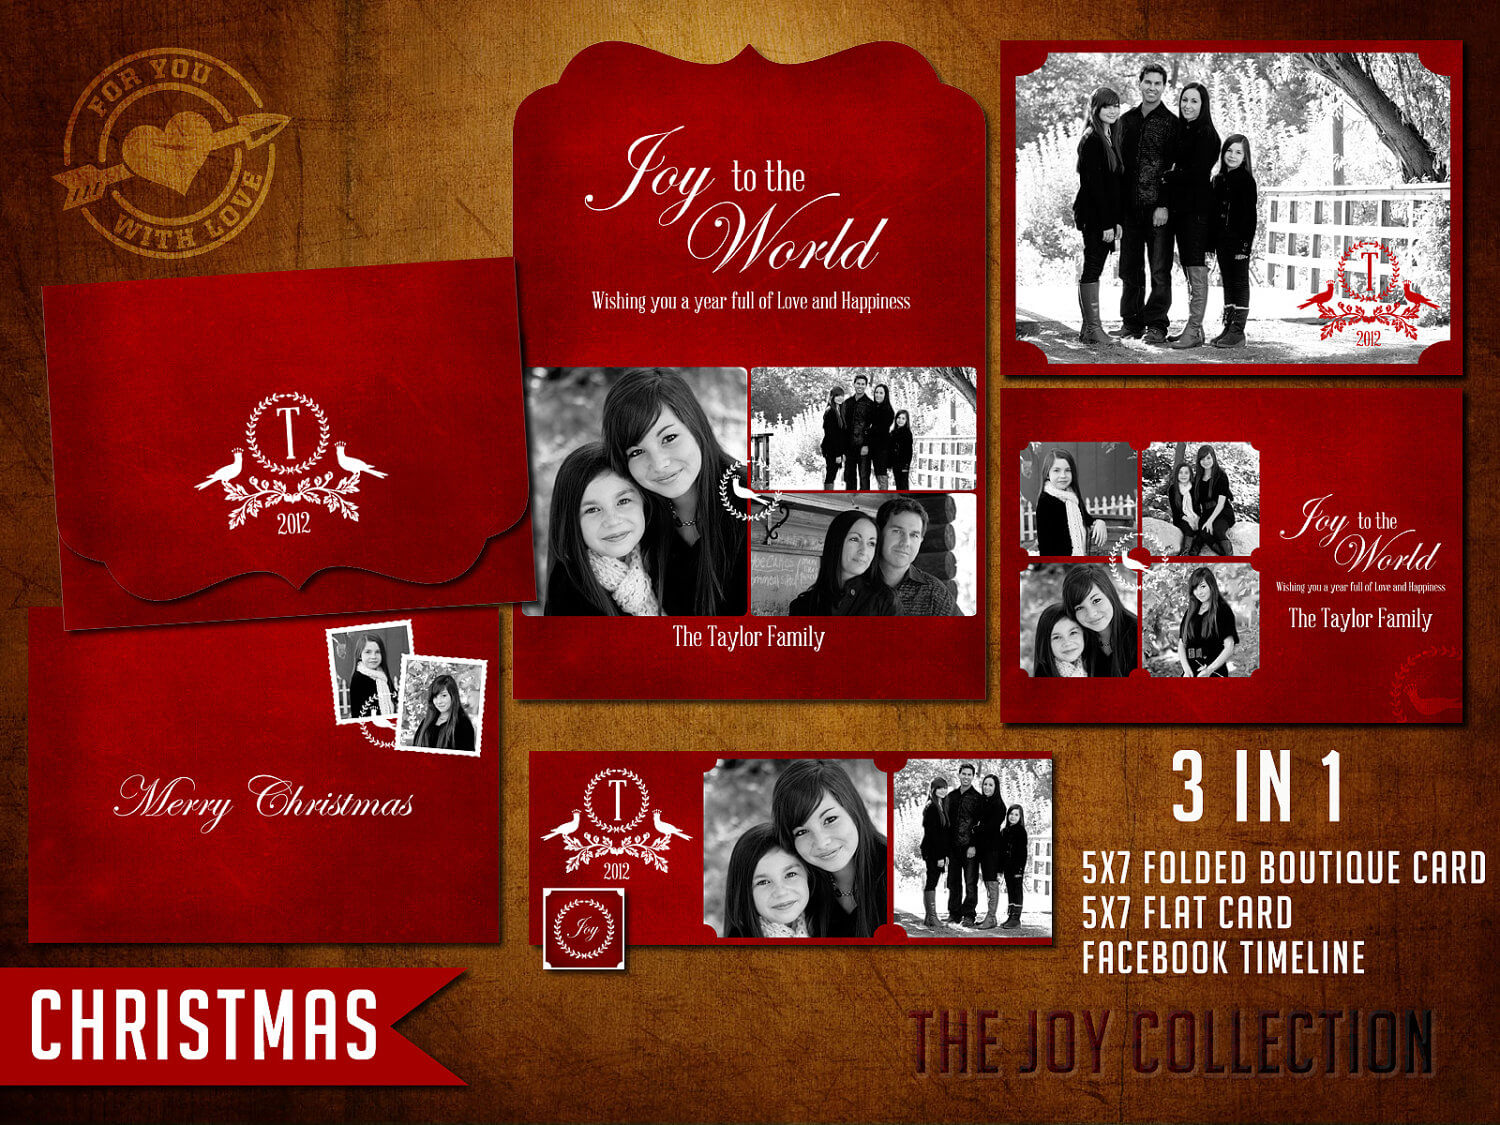 100+ [ Pages Christmas Card Templates ] | Christmas Party Intended For Free Photoshop Christmas Card Templates For Photographers